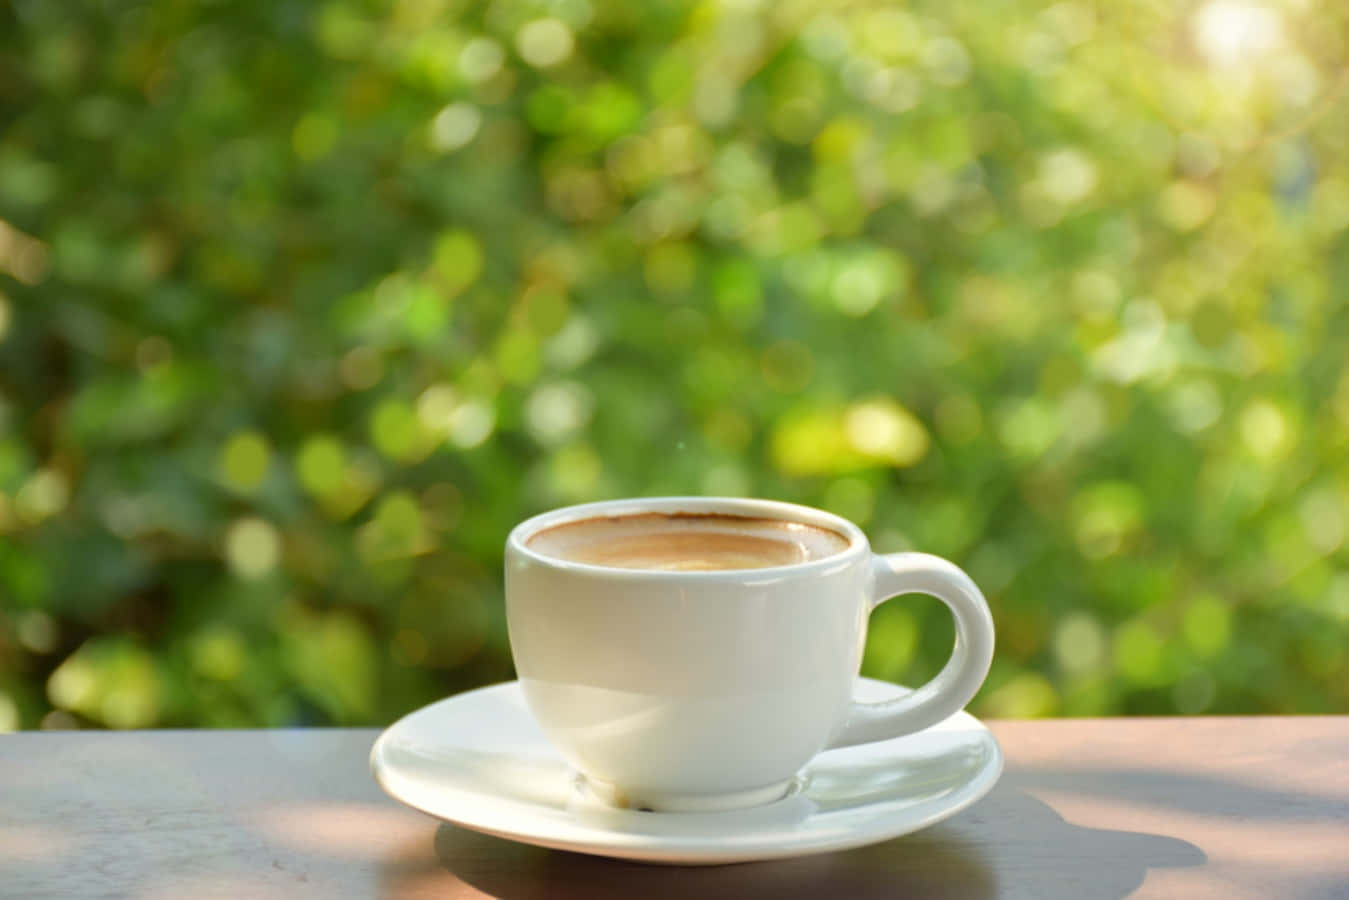 A White Cup Of Coffee On A Table In The Sun